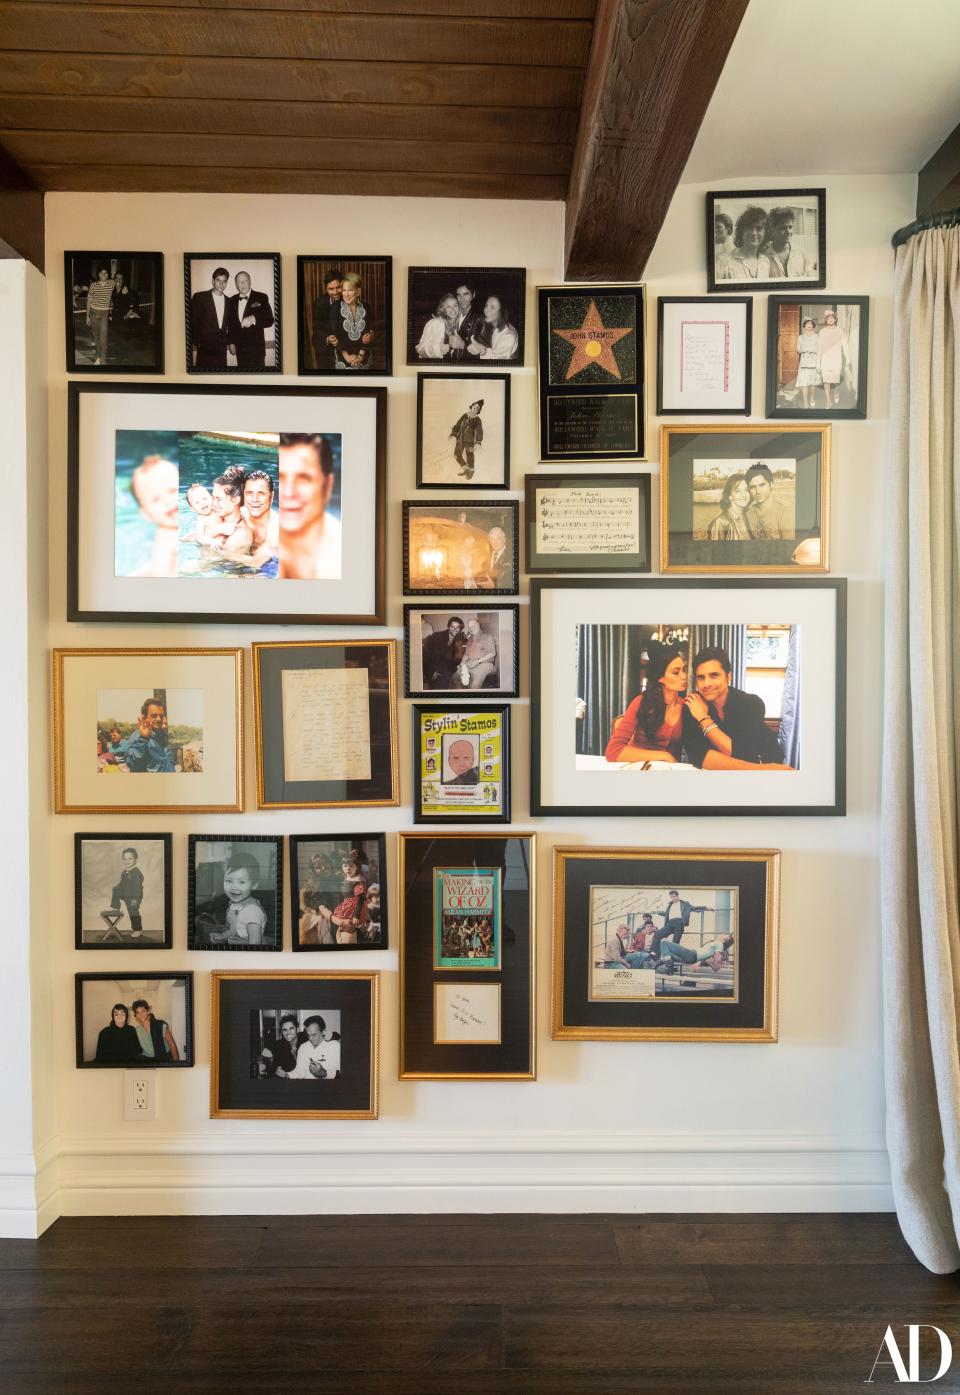 The dining room features a spread of pictures and other personal items, including framed letters from Stamos’s late parents and notes from celebrities and friends. Stamos shares: “Grease is one of my favorite movies, and I had John Travolta sign a picture after I told him he was my inspiration for becoming an actor. So he wrote, ‘I’m proud to be your inspiration.’”